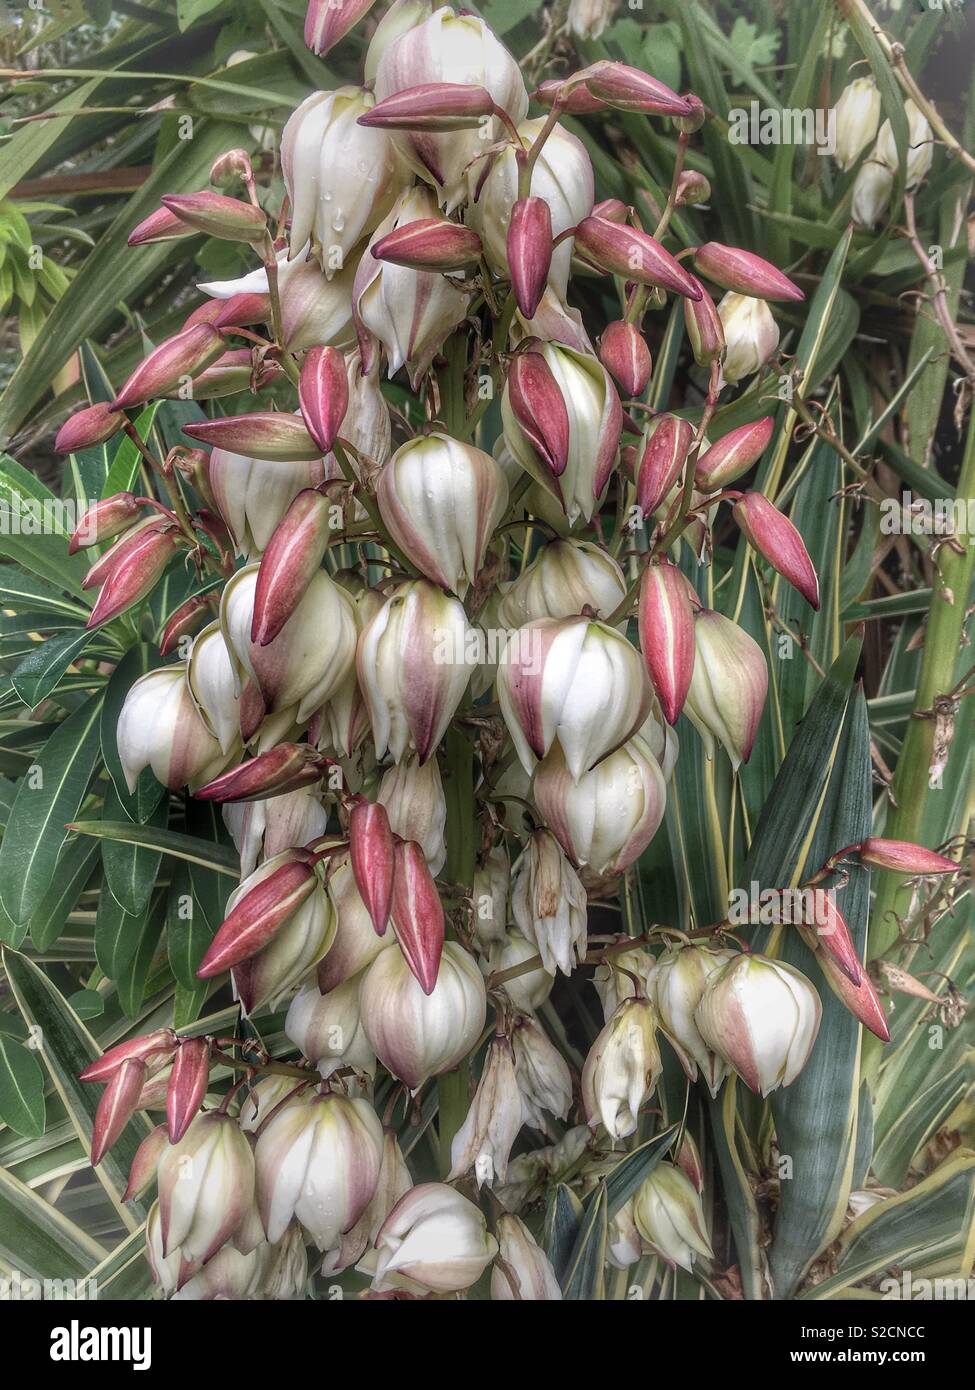 Flowers of Yucca ‘Bright Star’ Stock Photo